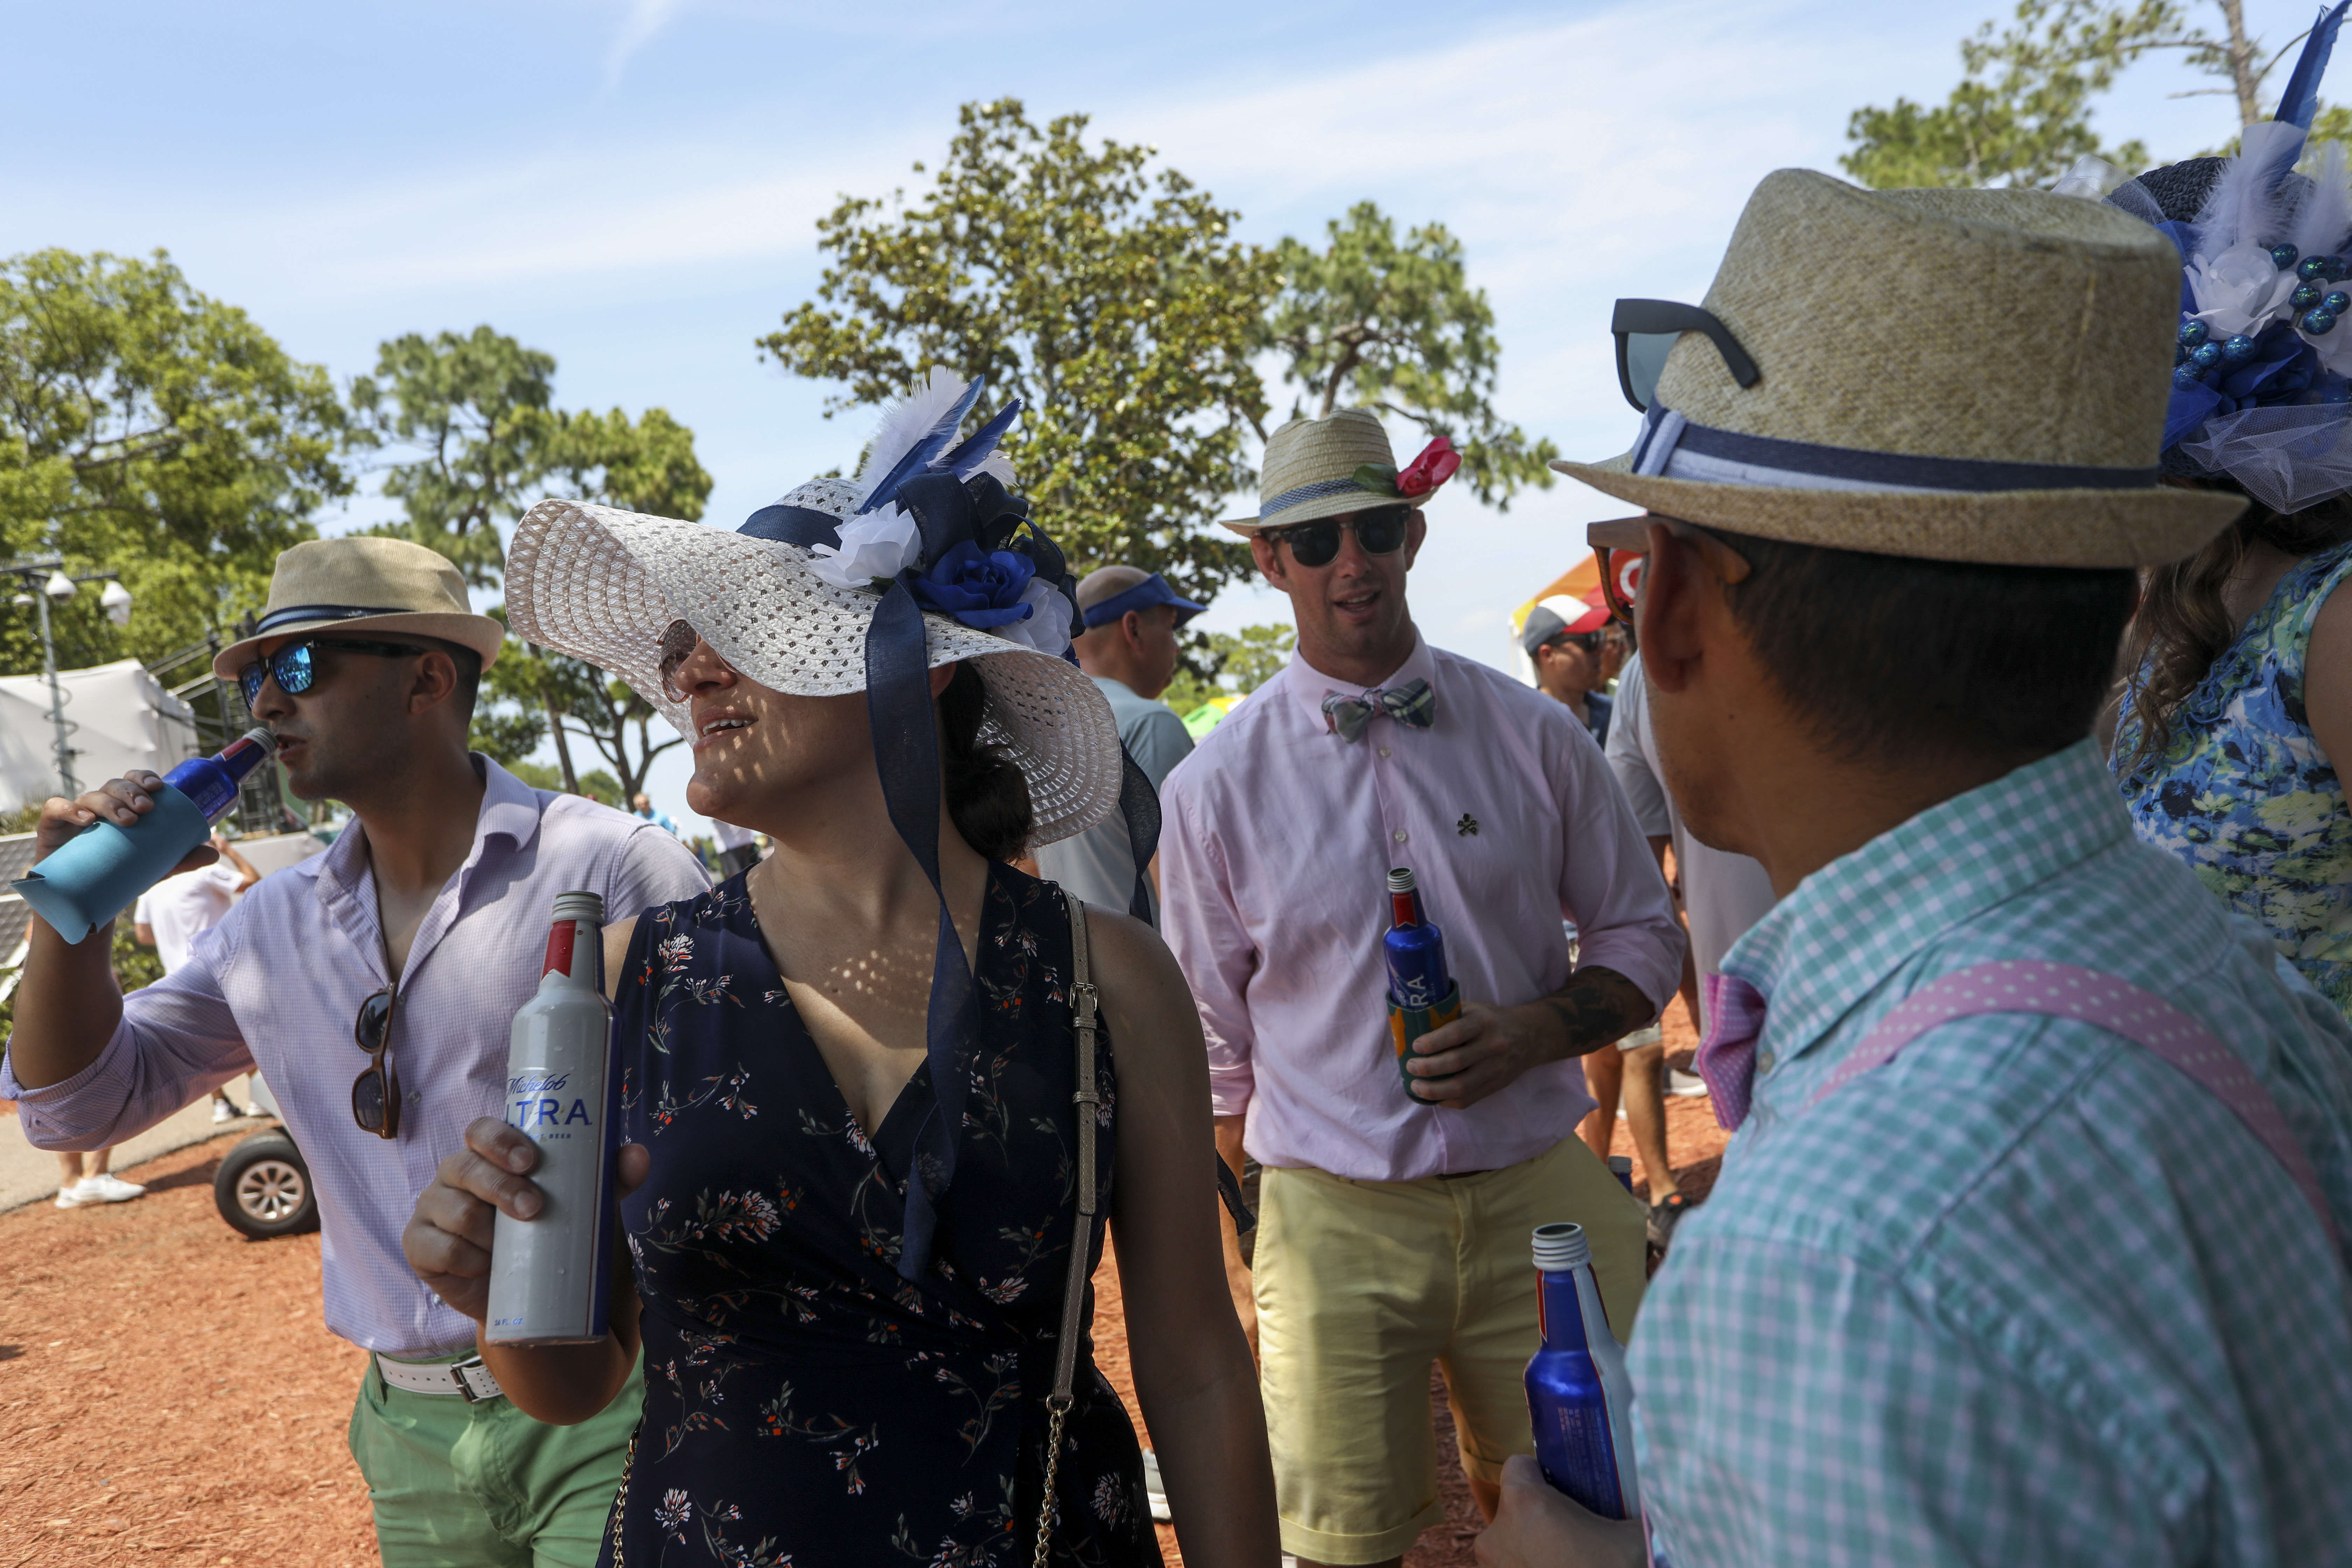 28 ways to celebrate Kentucky Derby Day in the Tampa Bay area